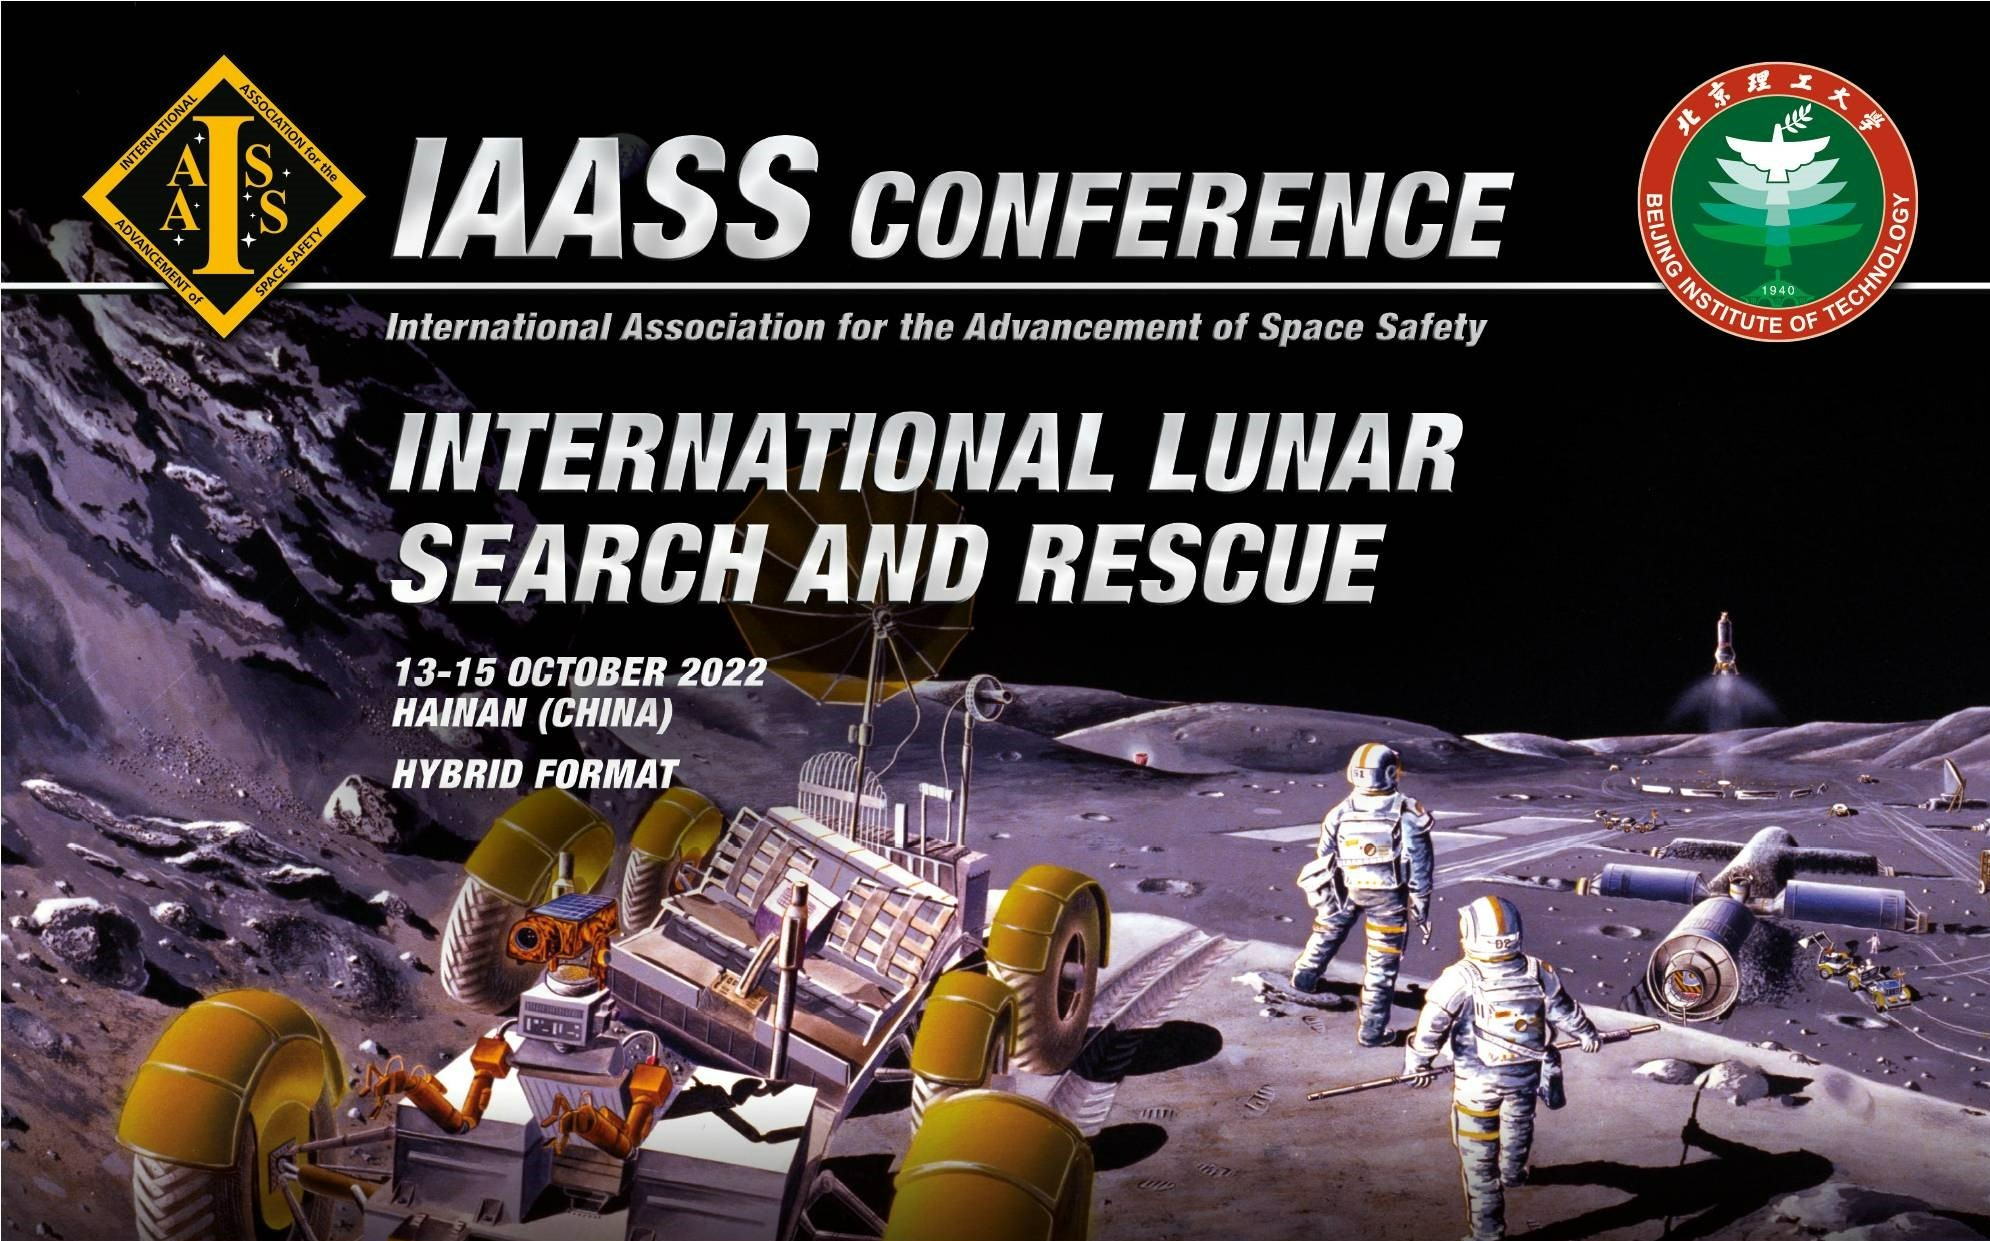 A graphic promoting the upcoming meeting of the International Association for the Advancement of Space Safety.